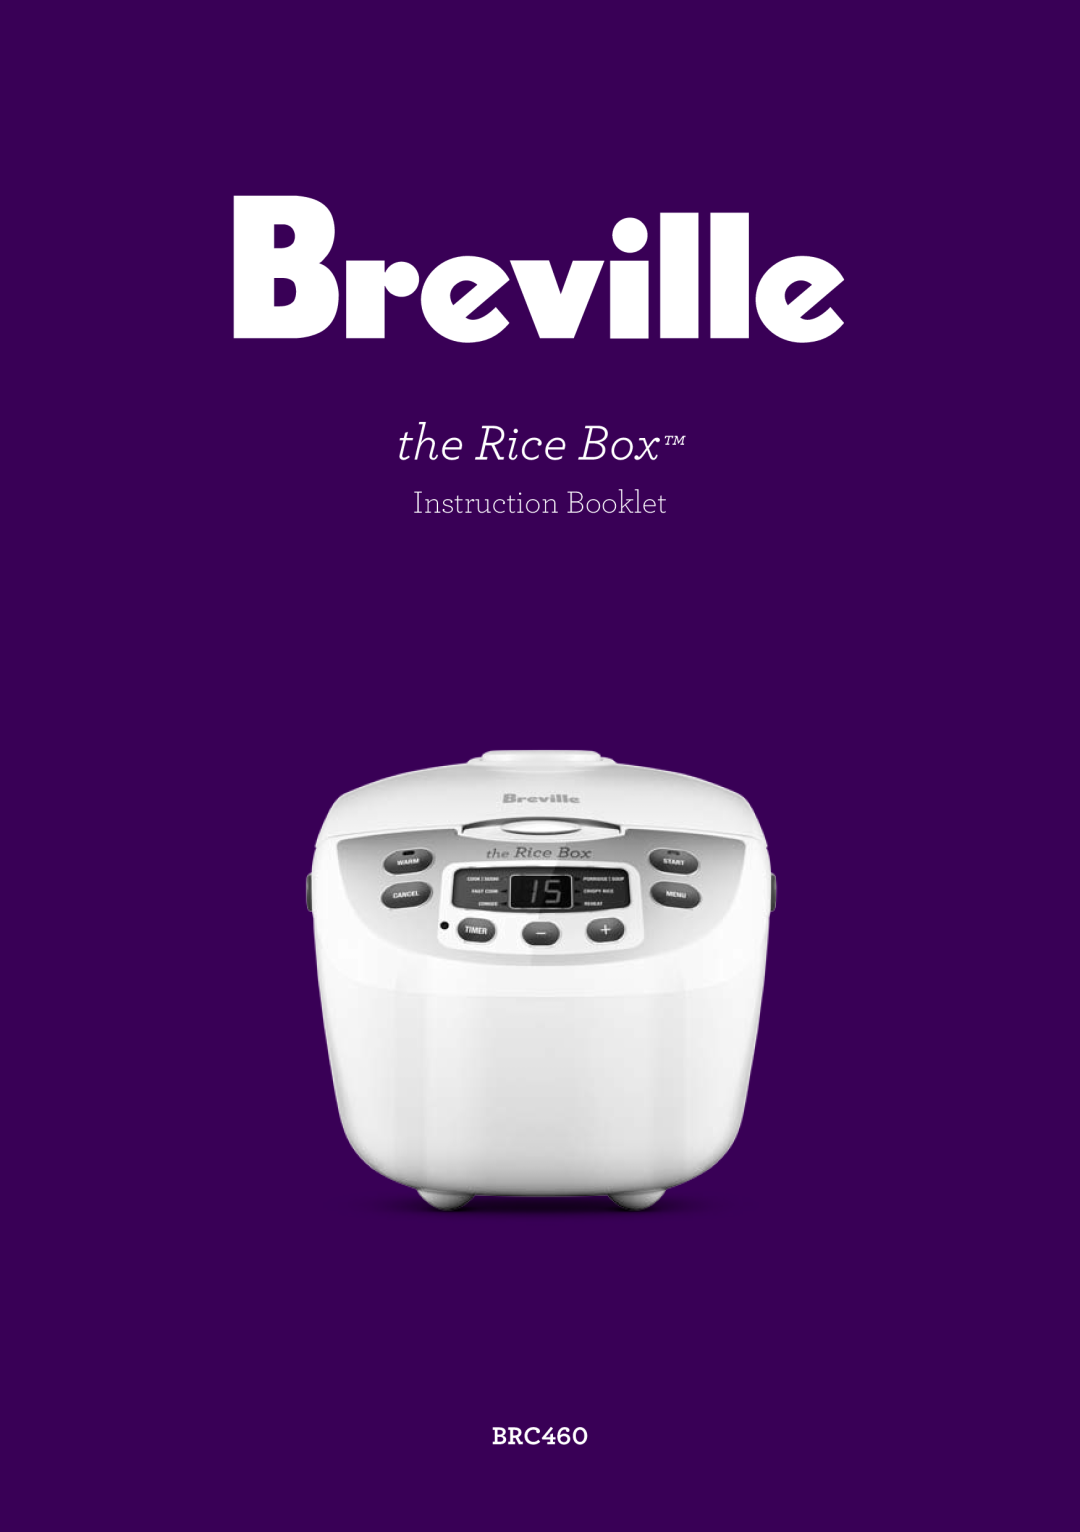 Breville BRC460 brochure the Rice Box, Instruction Booklet 